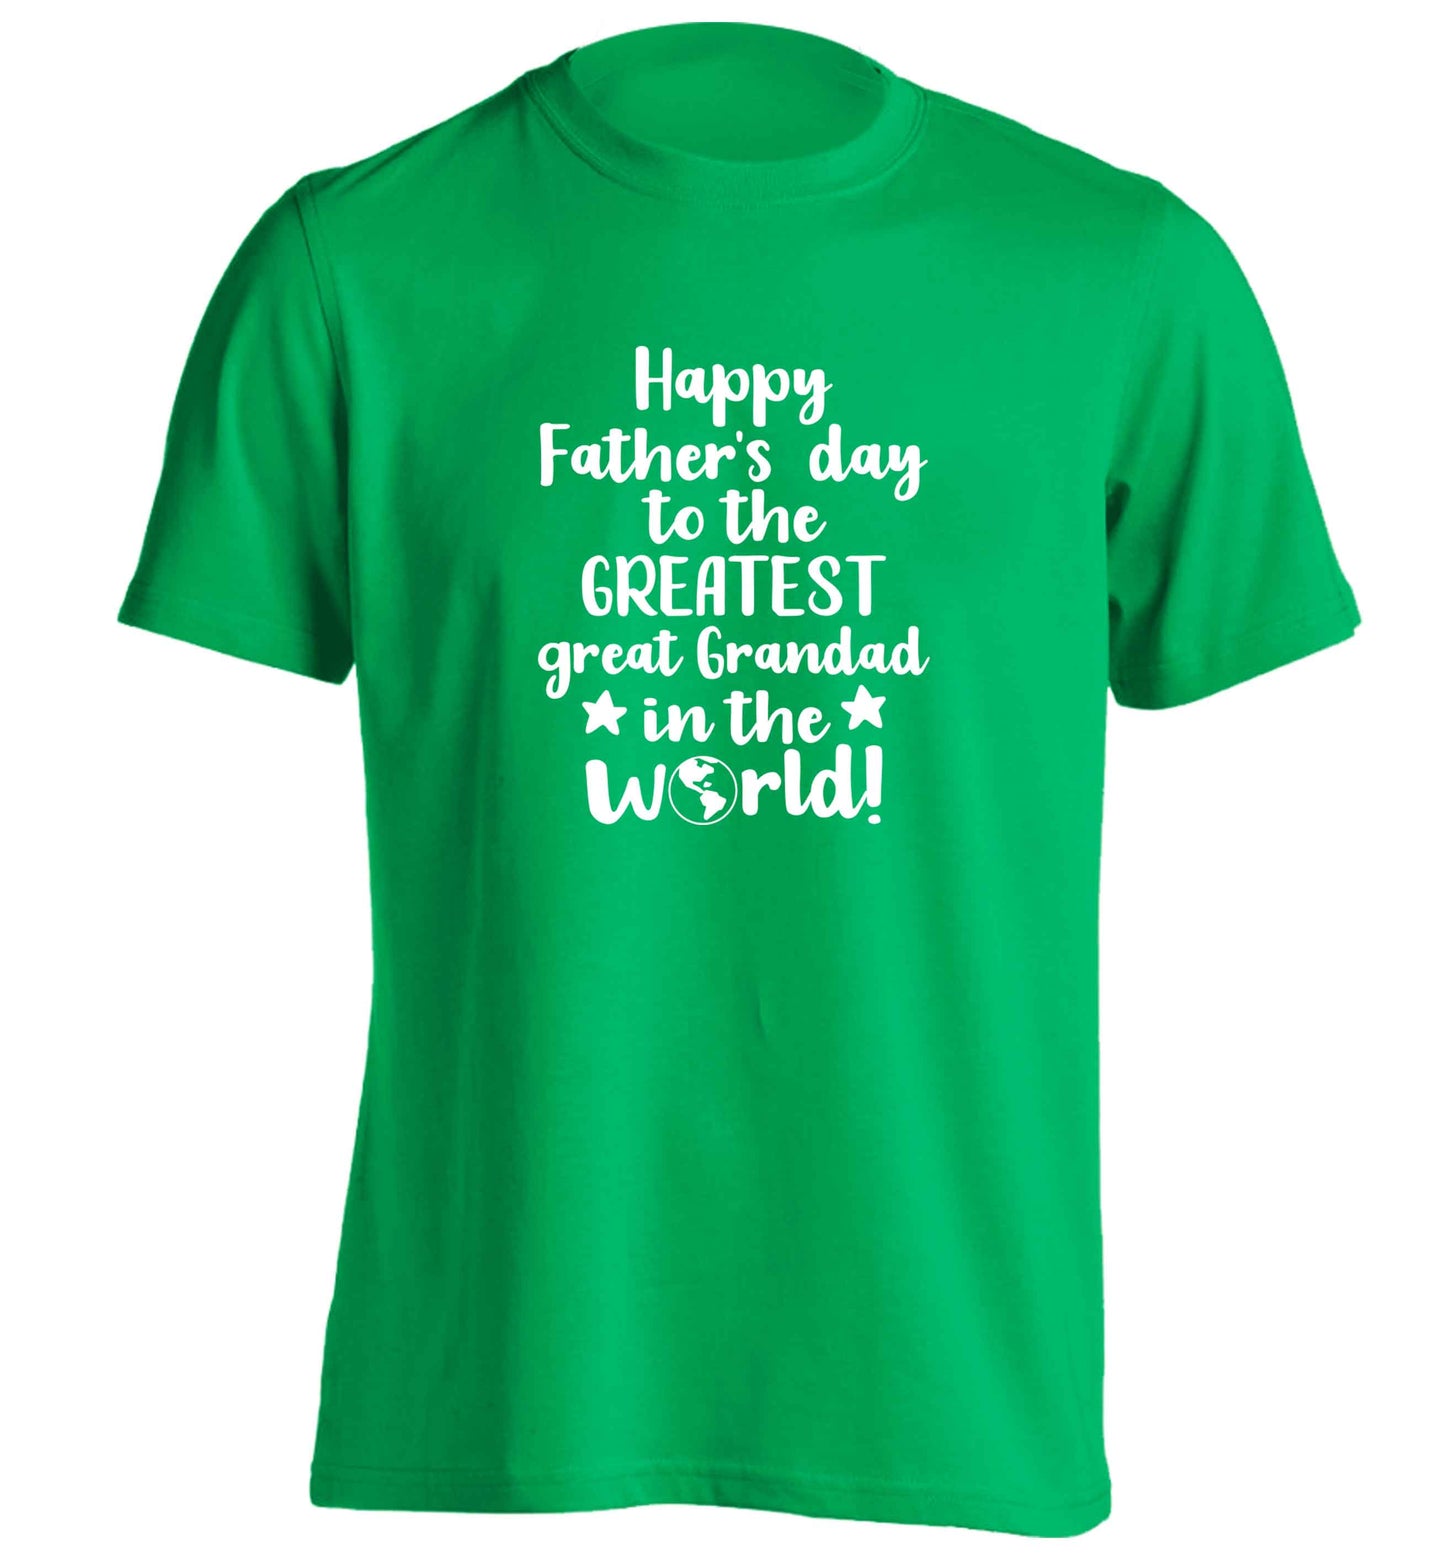 Happy Father's day to the greatest great grandad in the world adults unisex green Tshirt 2XL